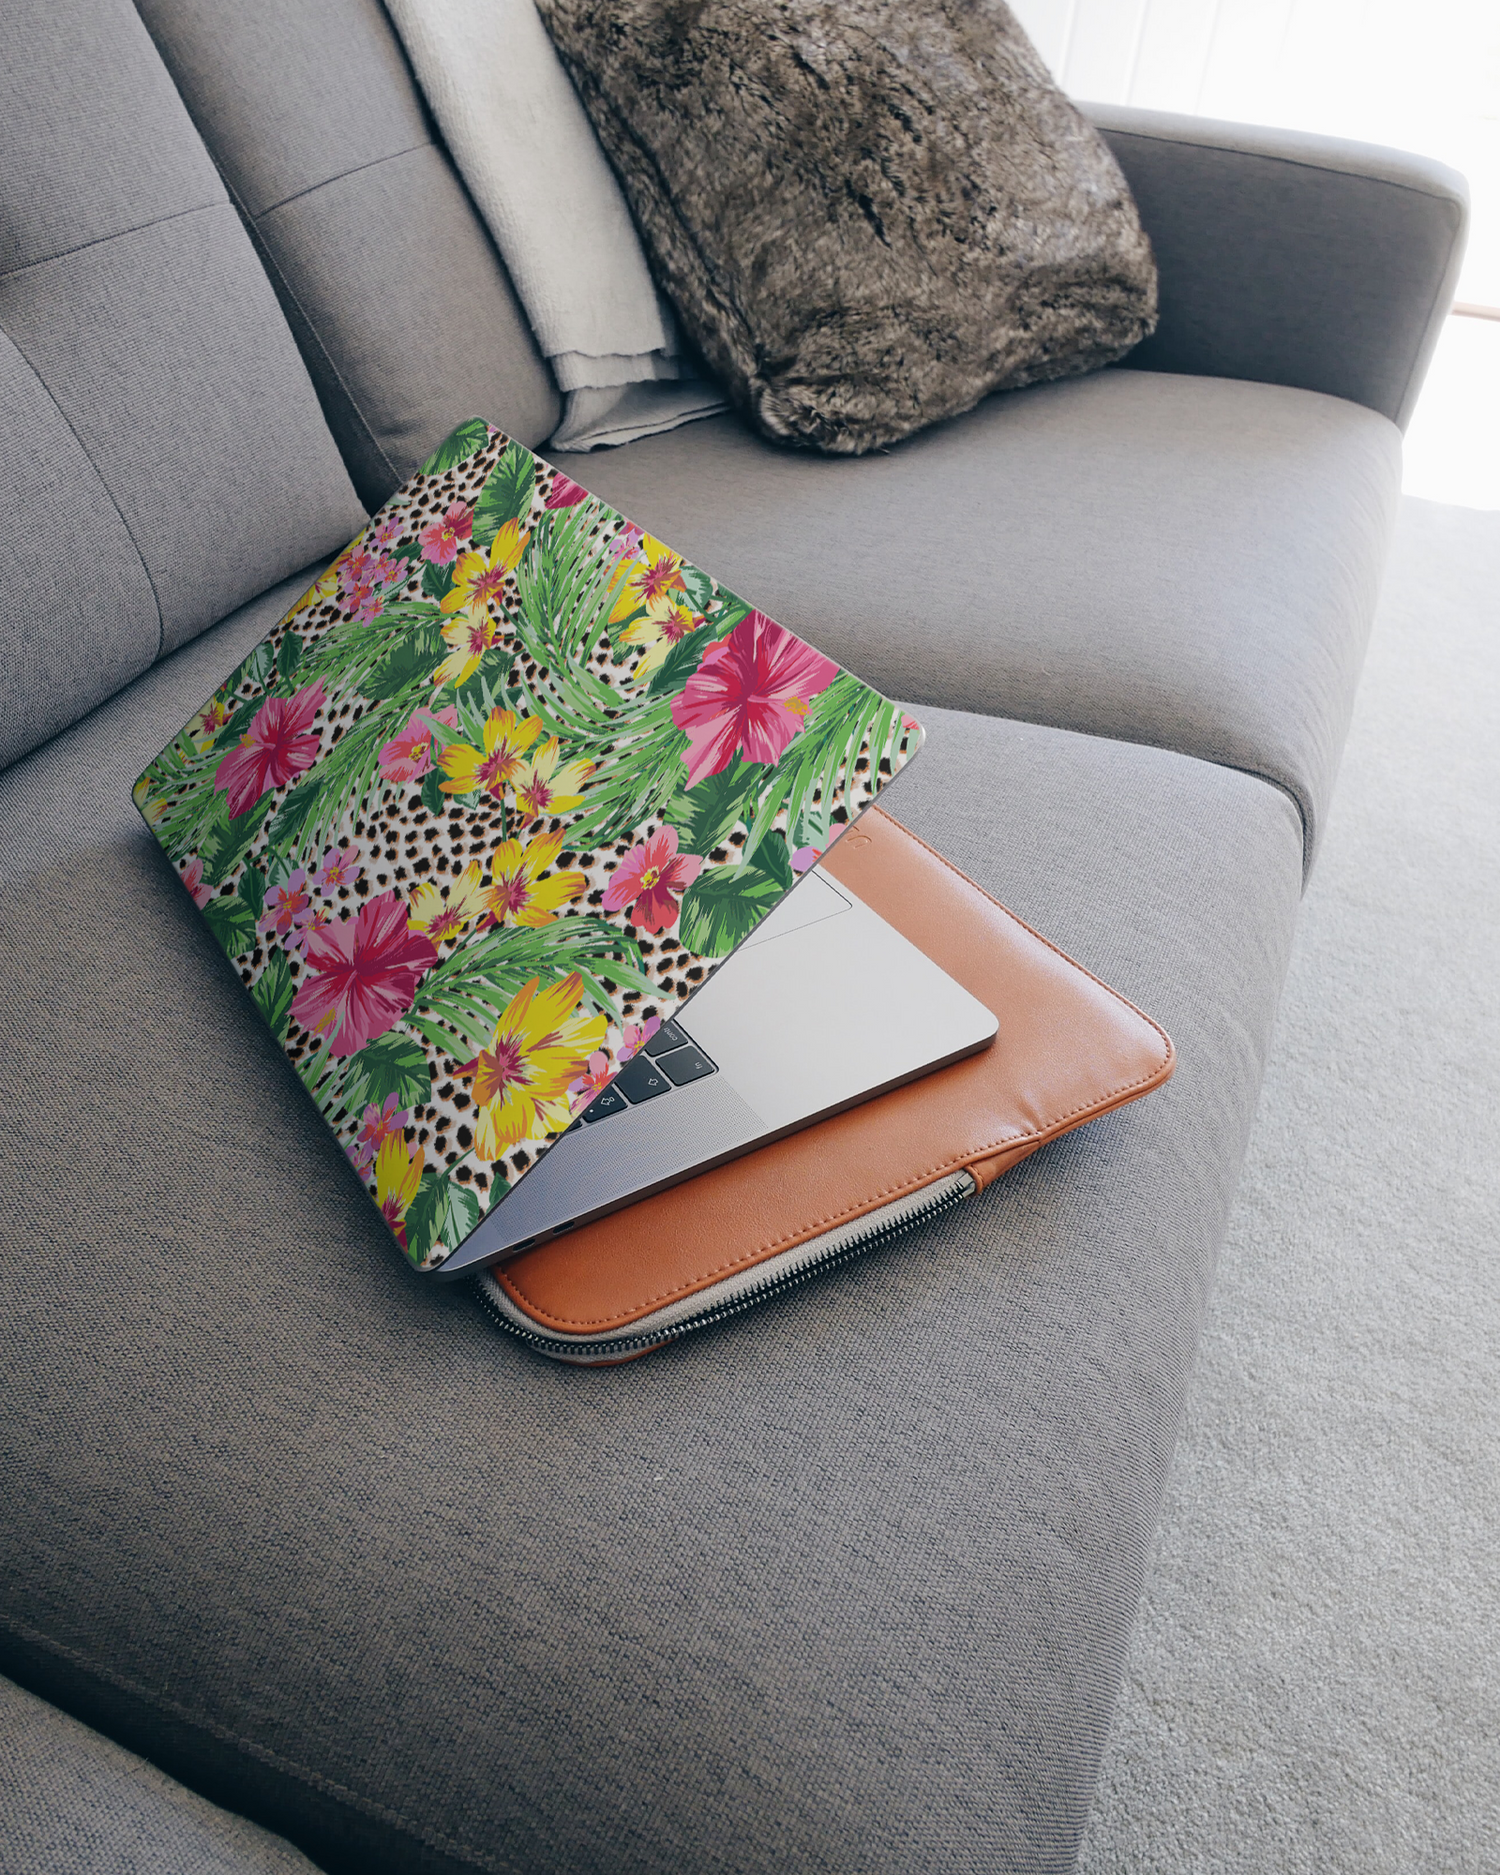 Tropical Cheetah Laptop Skin for 15 inch Apple MacBooks on a couch